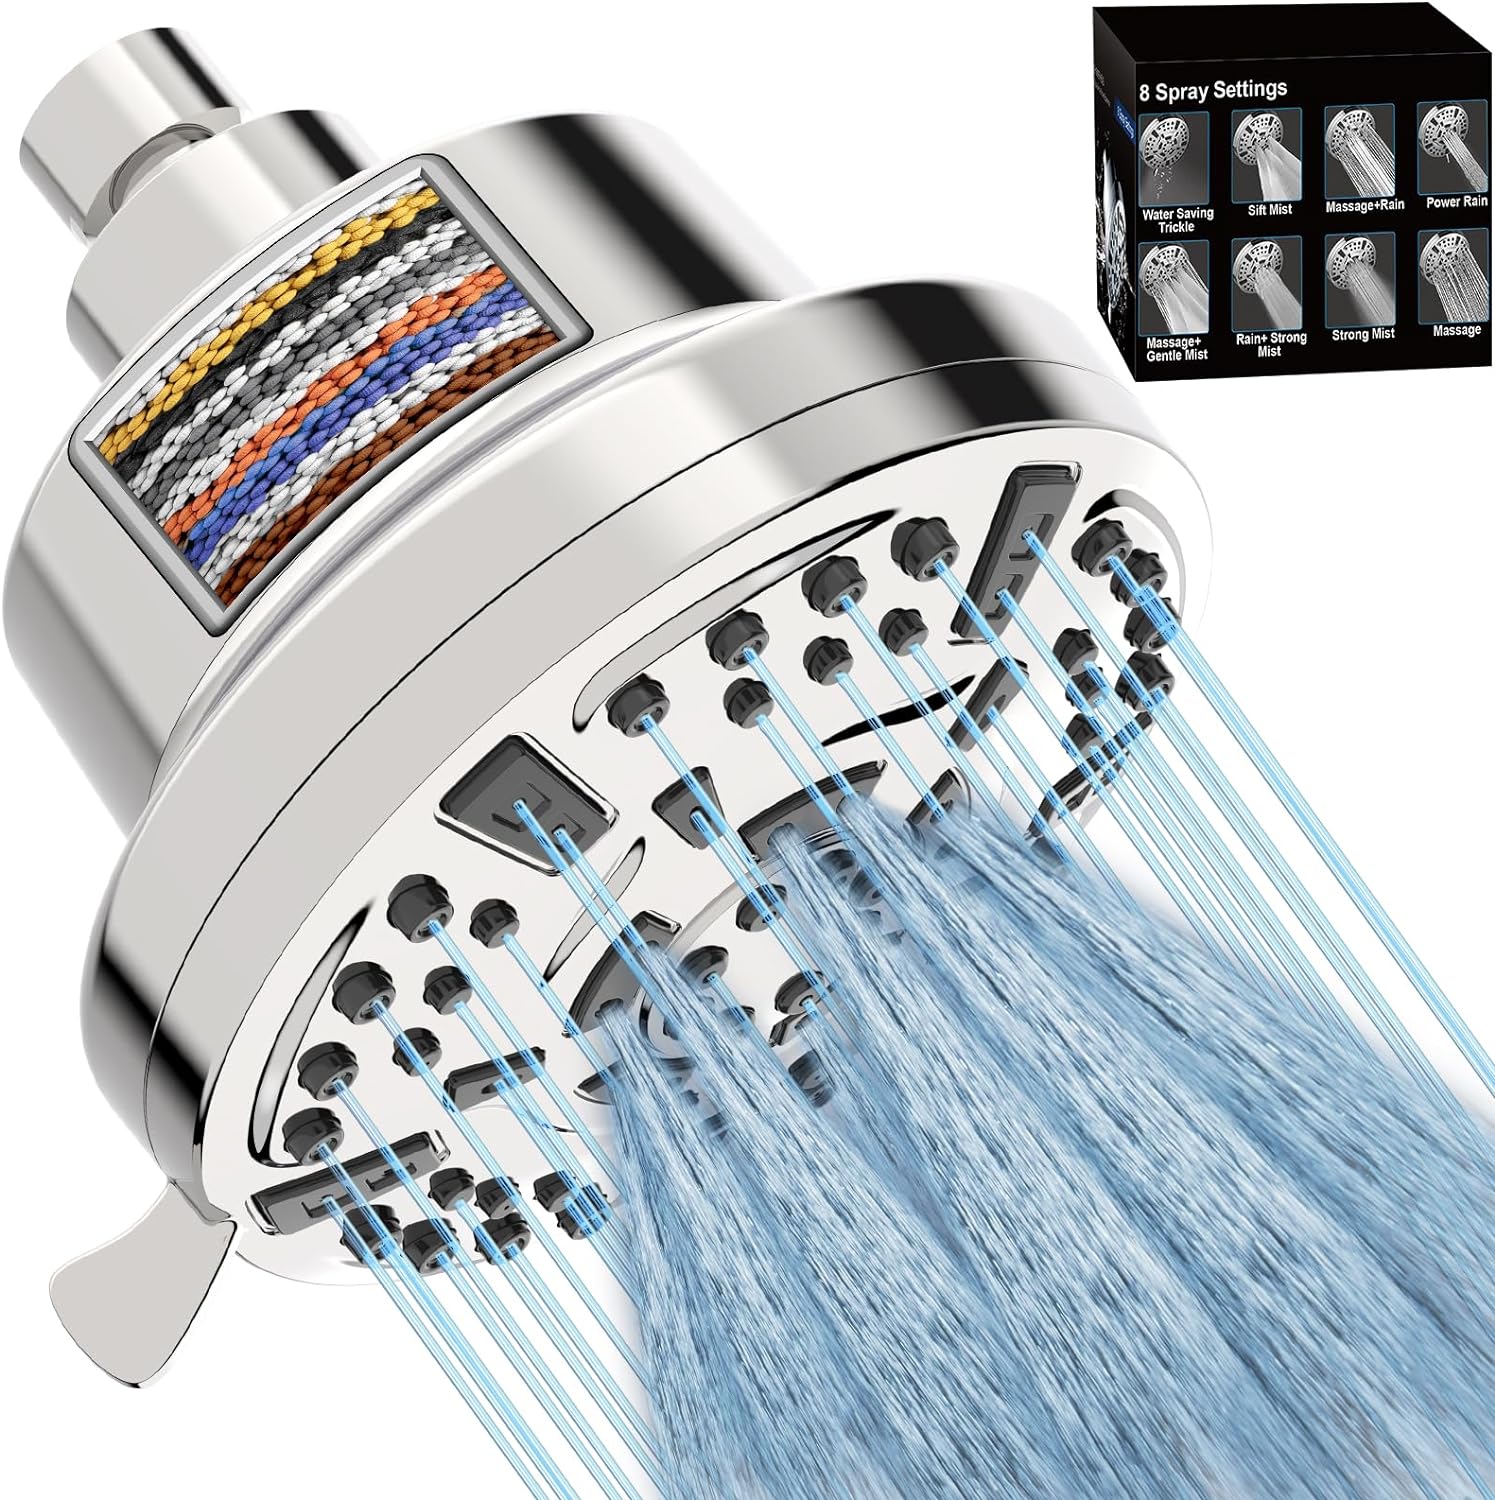 Shower Head, 5.7 Fixed High-Pressure Filtered Shower Heads, 8 Modes, 360Adjusted, Tool-Free Install, Shower Filter for Hard Water, Remove Harmful & Chlorine, Relaxed Shower (Luxury Chrome)